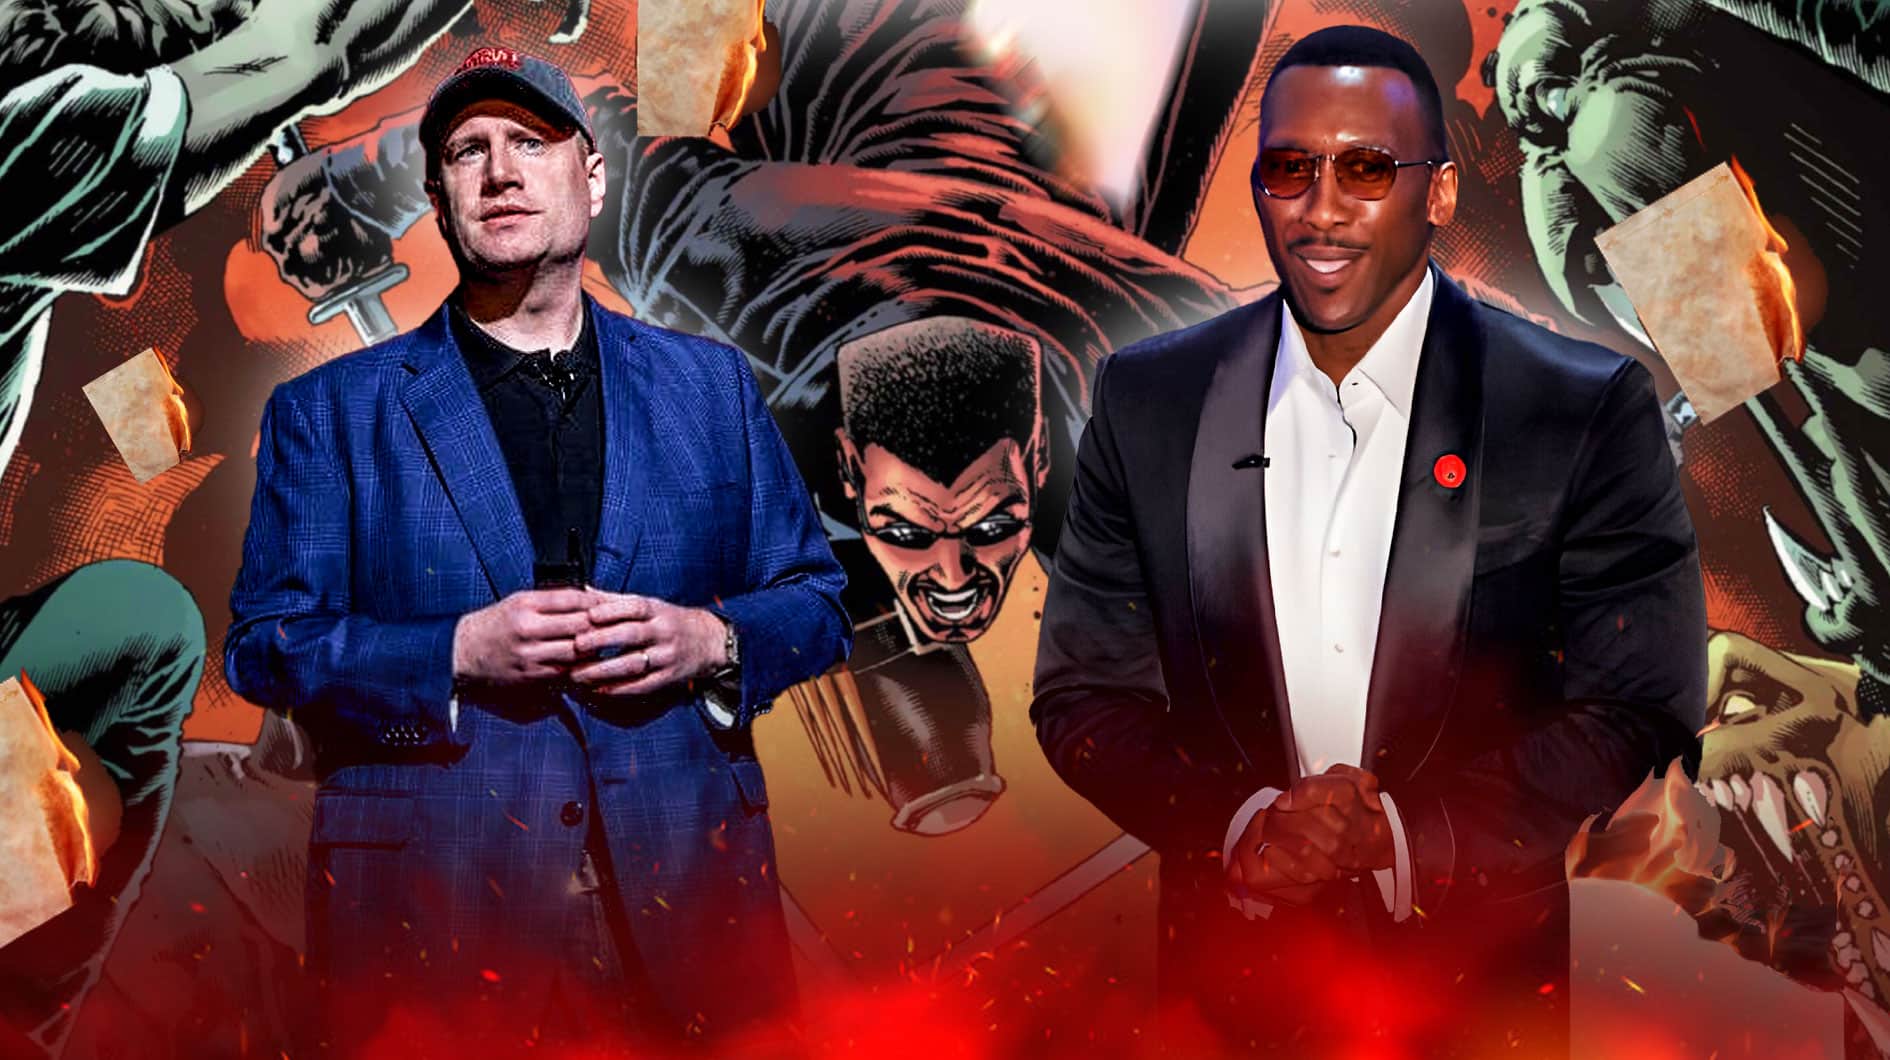 Mahershala Ali and Kevin Feige with a comic panel of Blade in between